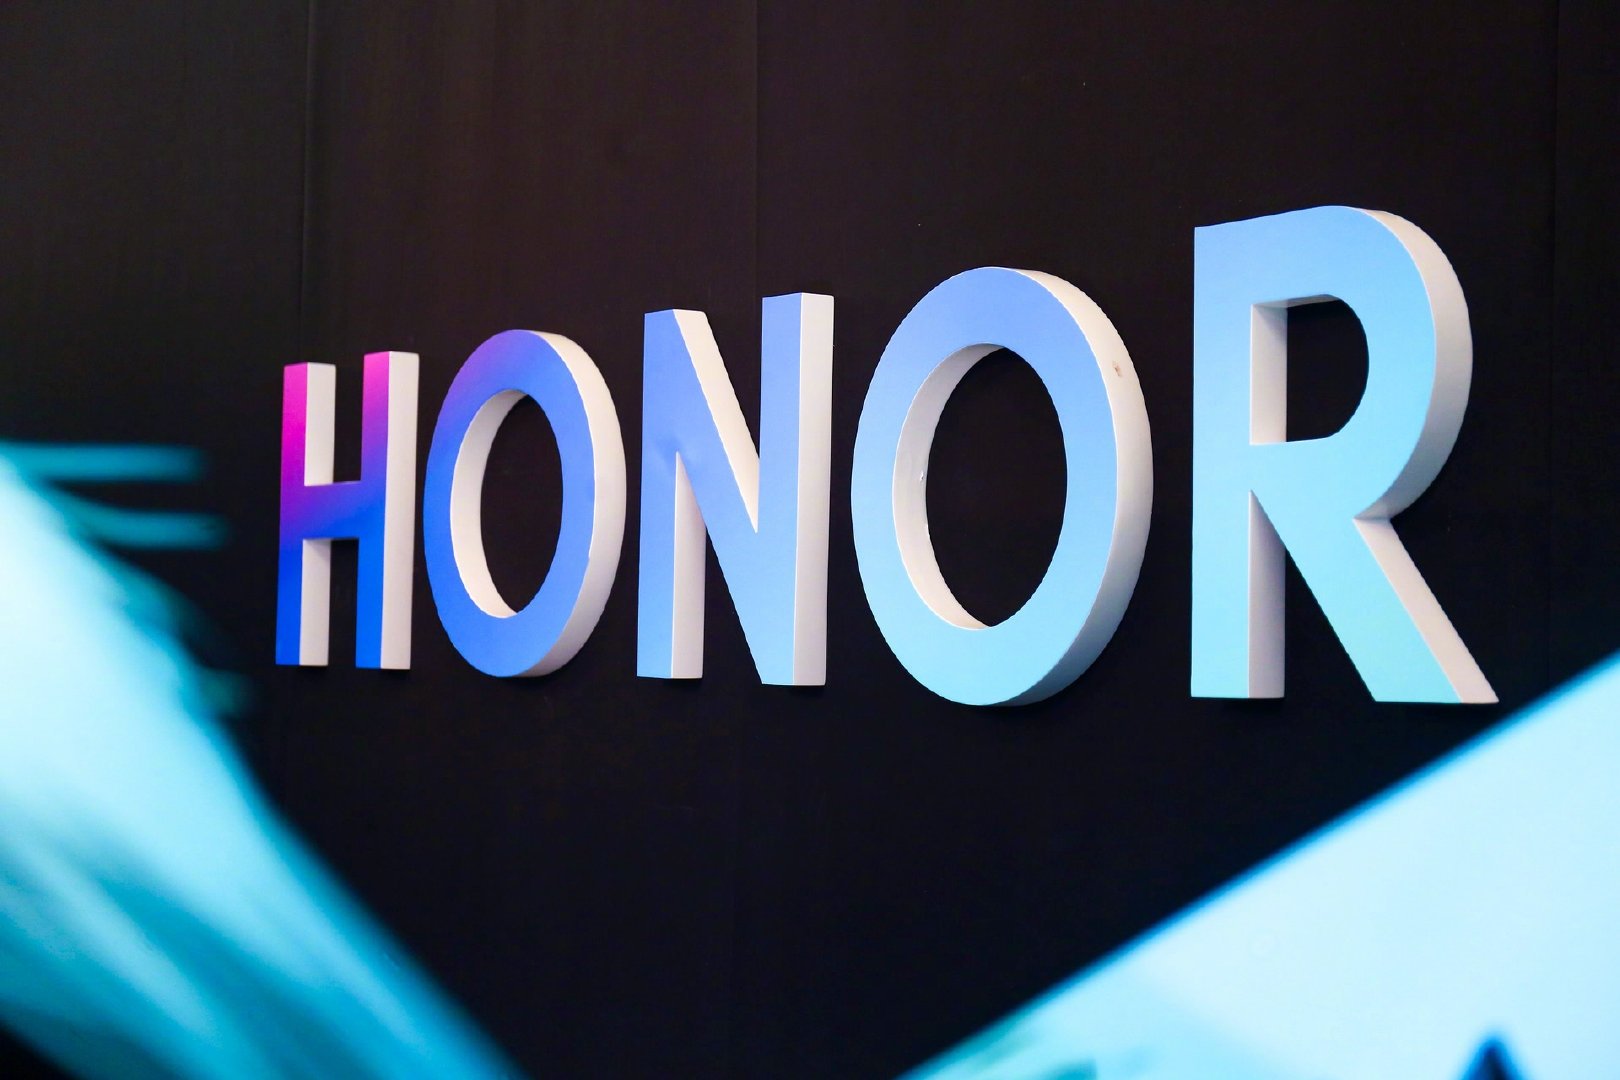 Honor going independent won’t impact operations and after-sales services